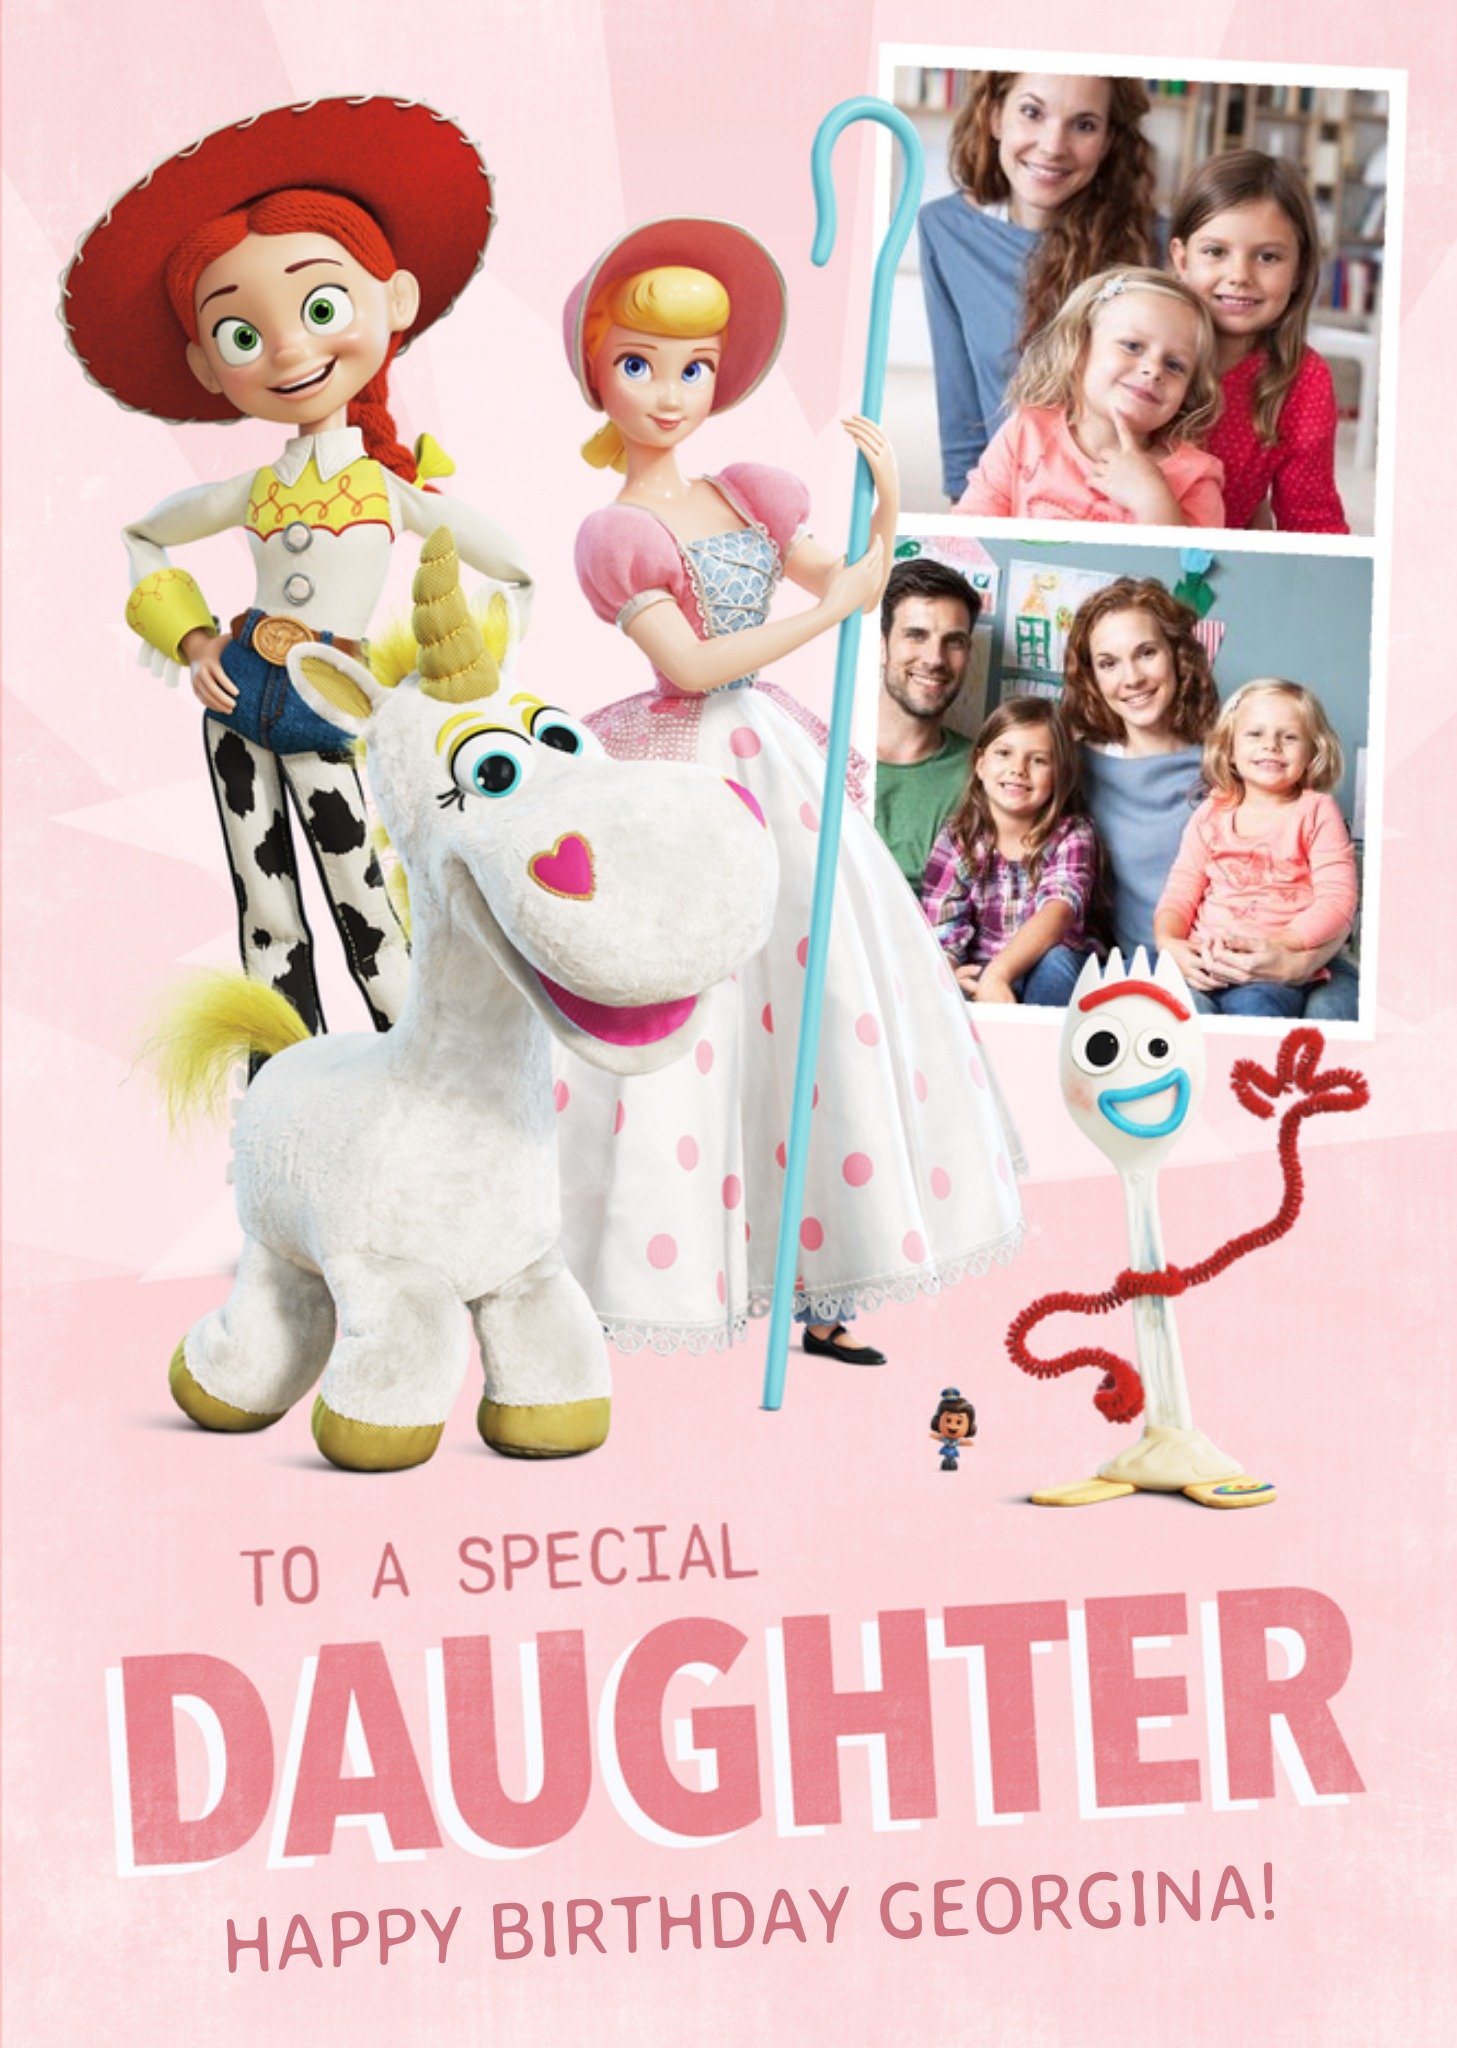 Toy Story 4 - To A Special Daughter Photo Upload Card Ecard